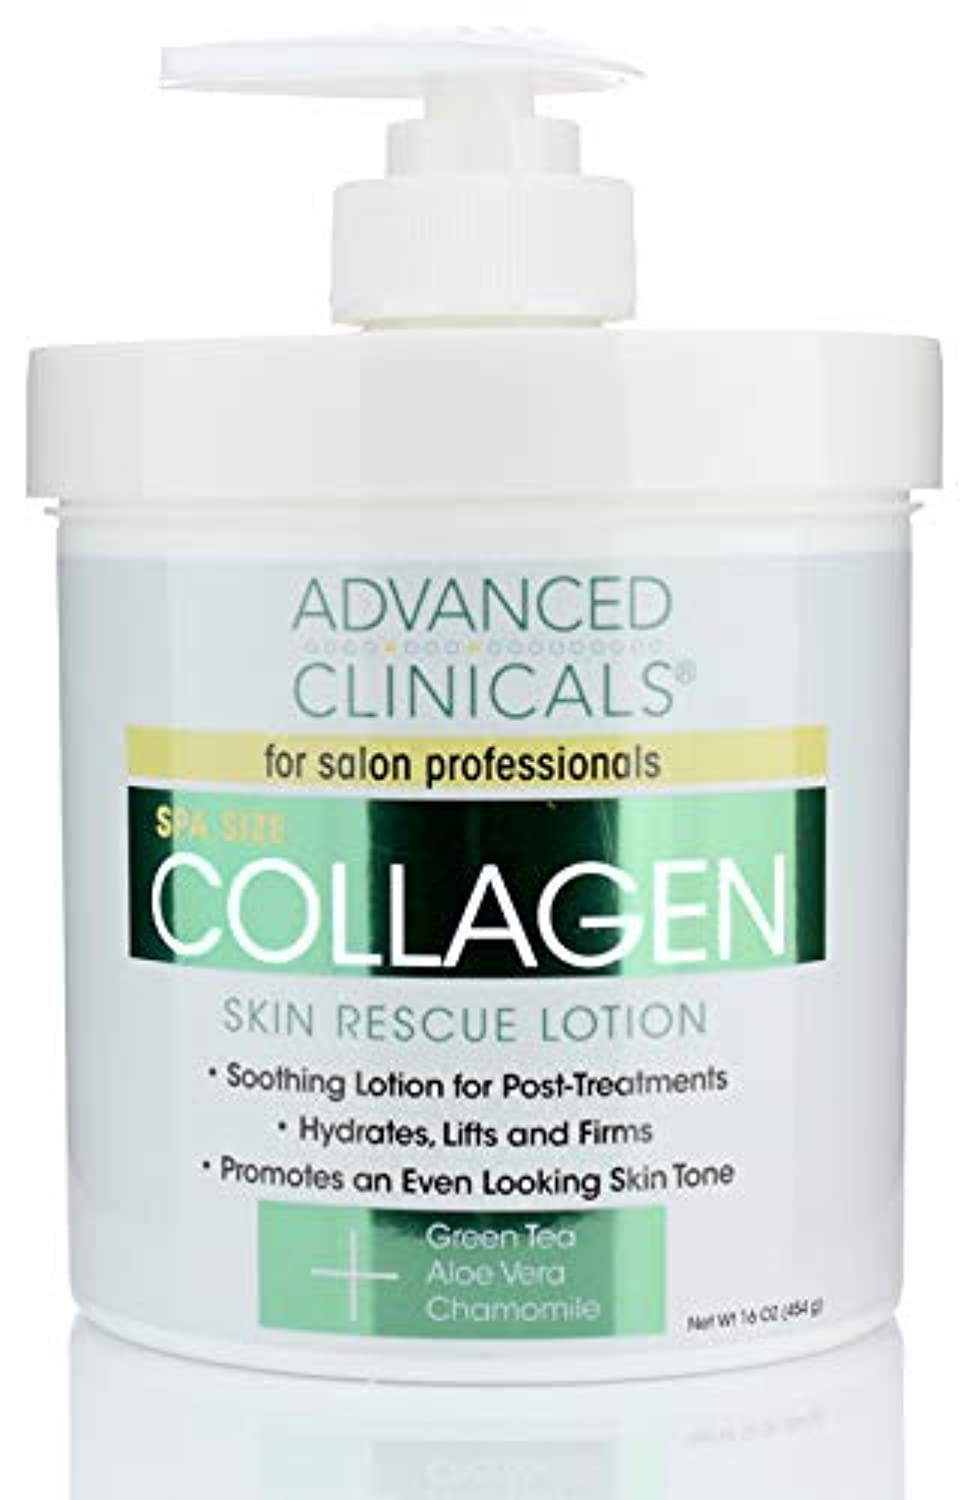 Advanced Clinicals 2 Piece Anti-aging Skin Care set with collagen. 16oz Spa Size Collagen Lotion And 1.75oz Collagen Instant Plumping Serum To Hydrate, Moisturize, Firm, Dry, Cracked Skin.